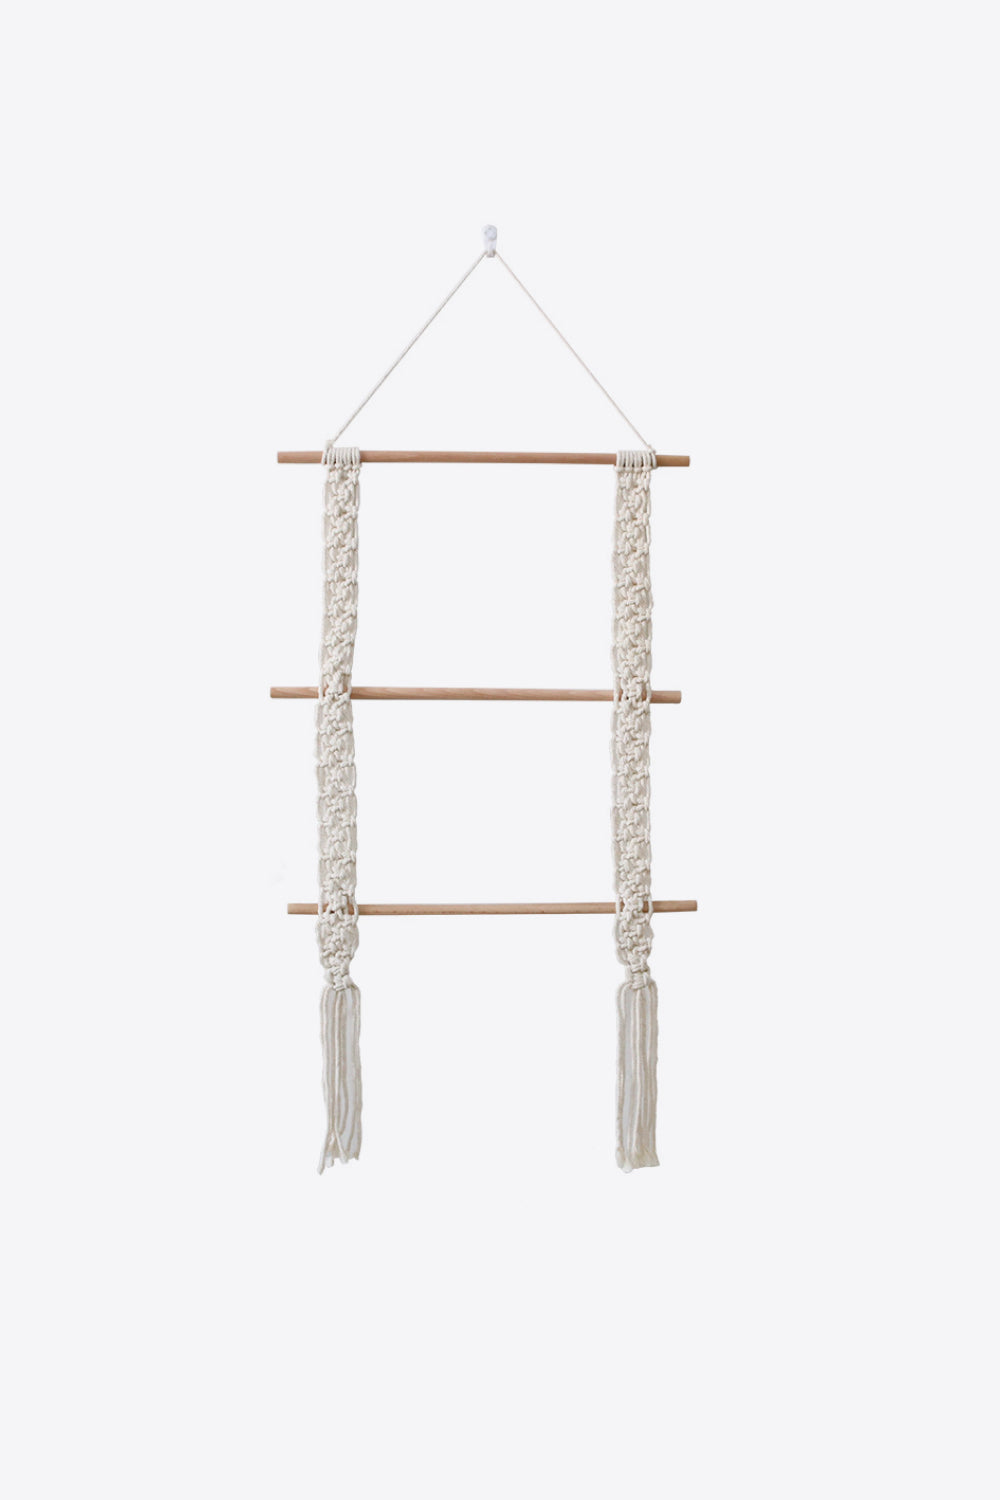 Macrame Ladder Wall Hanging Print on any thing USA/STOD clothes